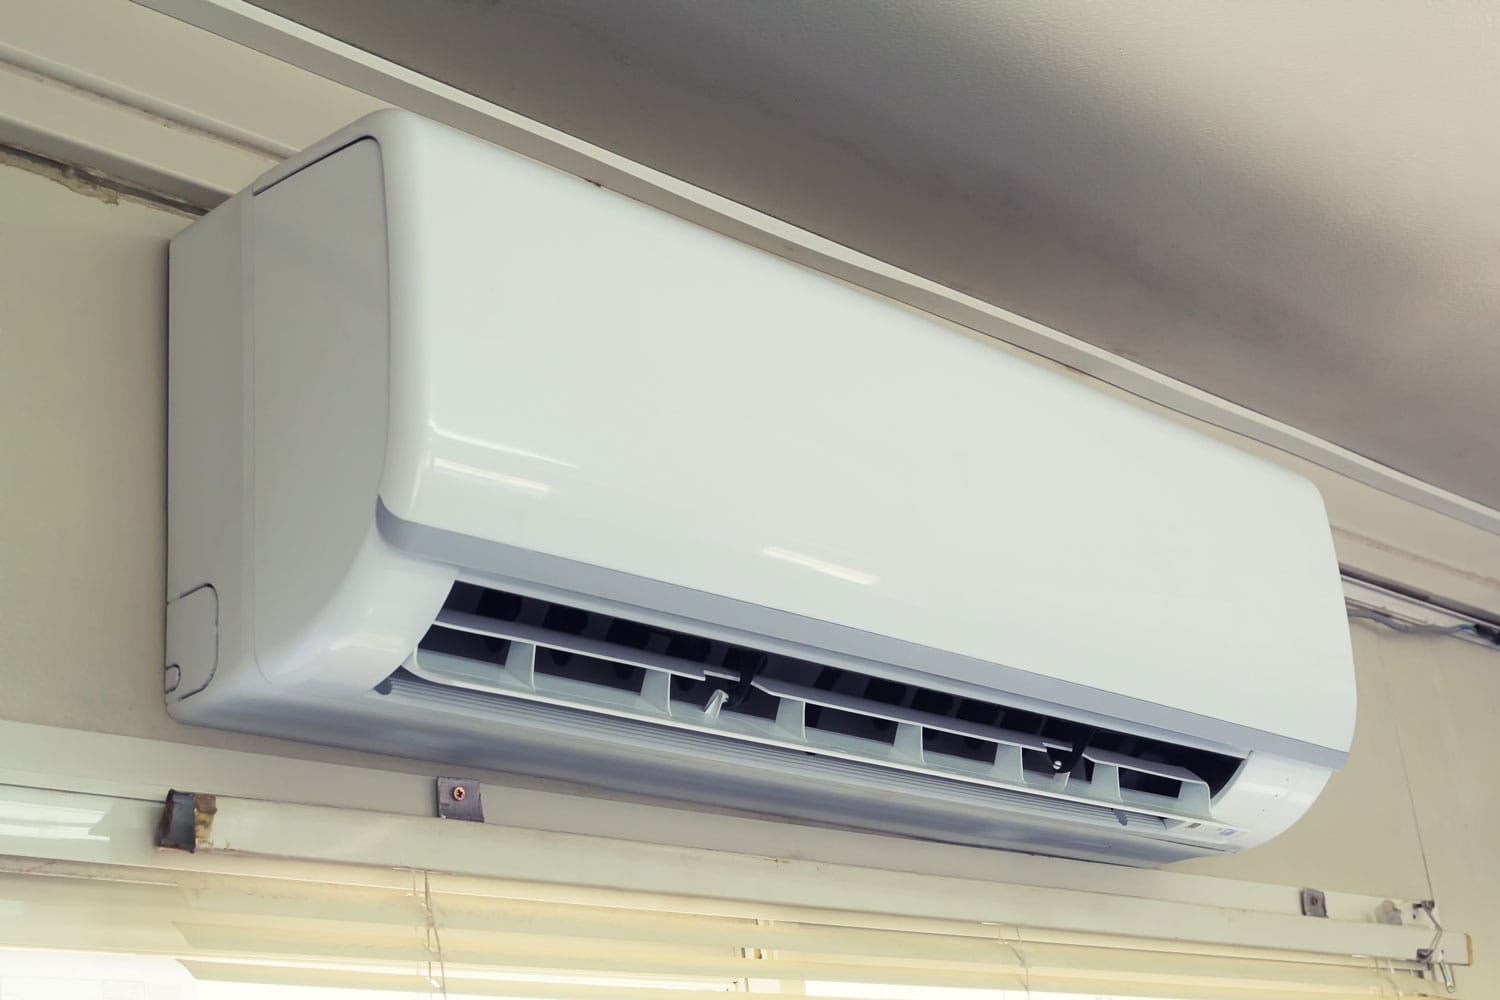 A big AC unit mounted on the side of the living room wall